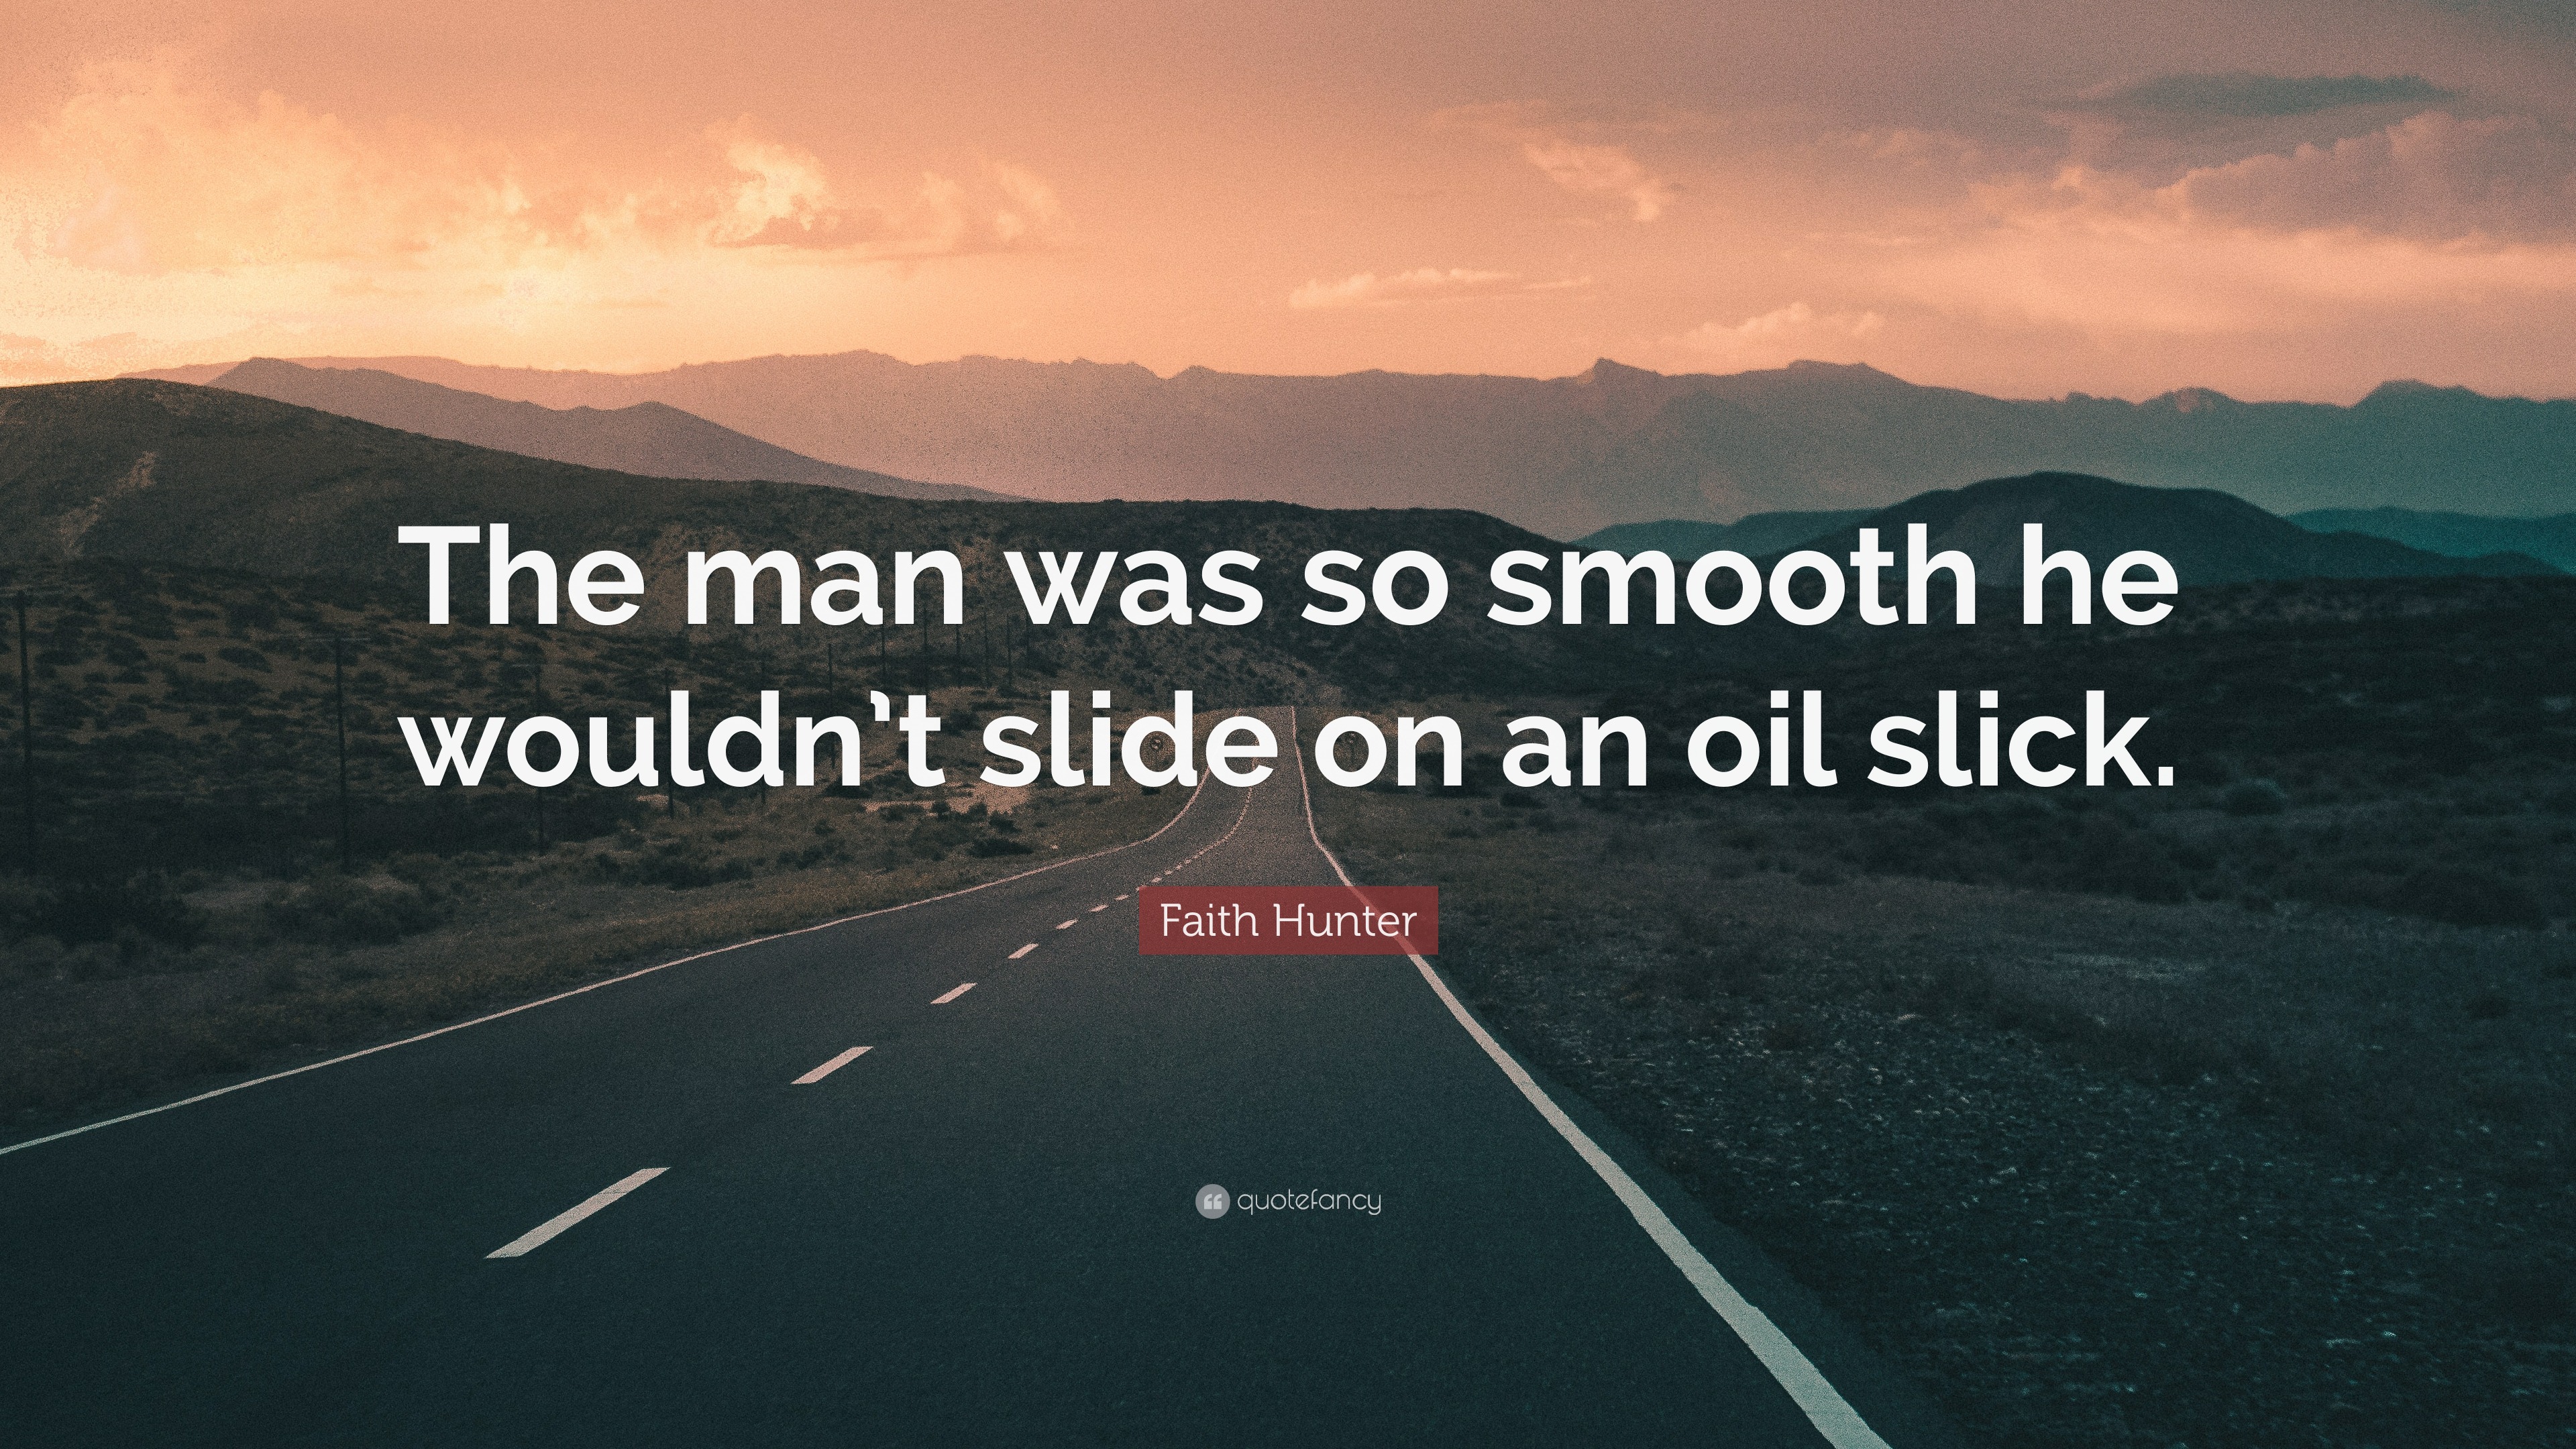 Faith Hunter Quote: “The man was so smooth he wouldn't slide on an